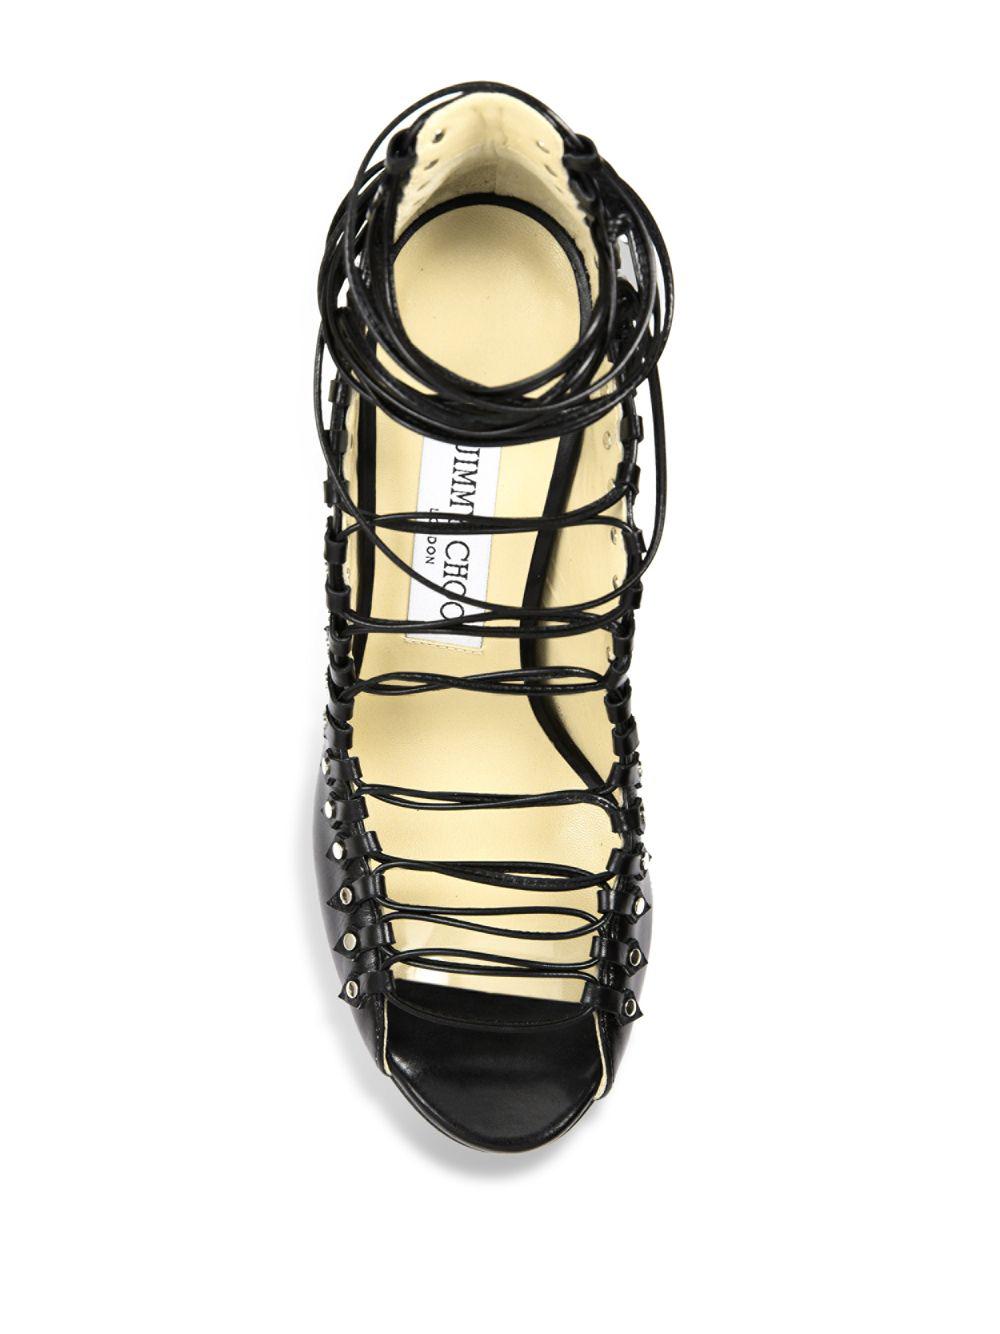 Lyst Jimmy Choo Koko  100 Leather Lace up Sandals  in Black